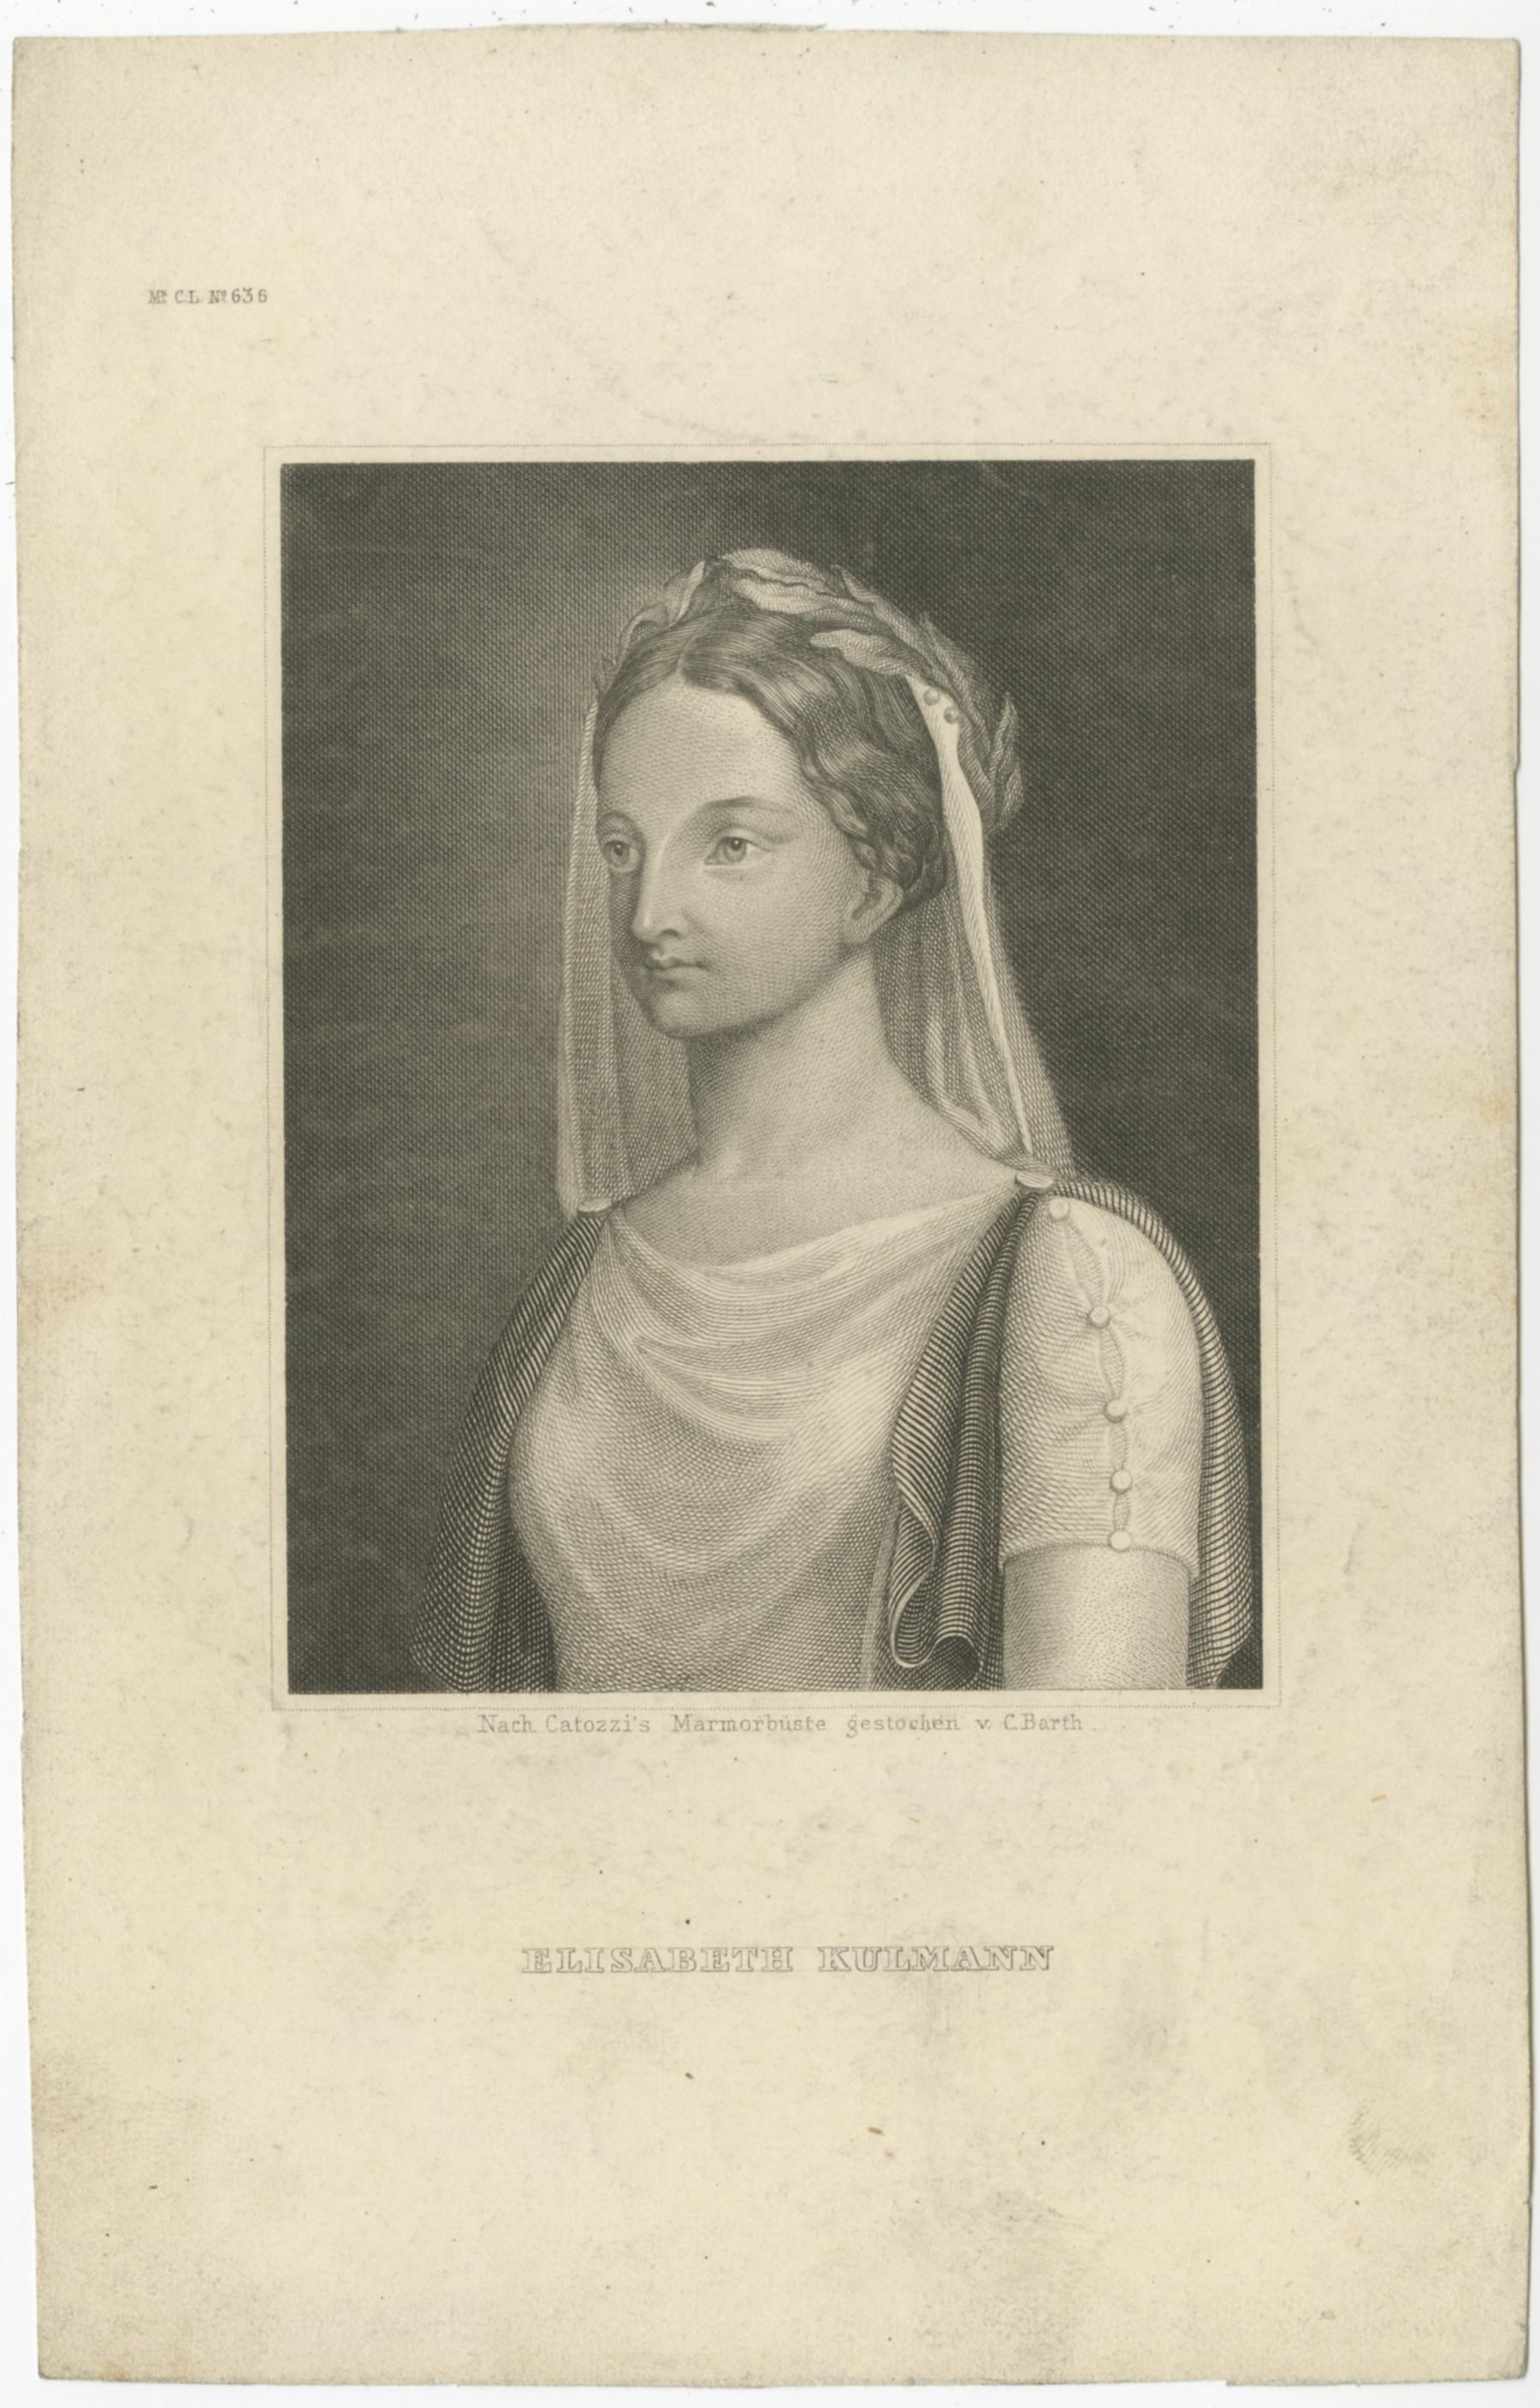 Antique print titled 'Elisabeth Kulmann'. 

Portrait of Elisabeth Kulmann, after a bust by Paolo Catozzi. Elisabeth Kulmann was a Russian-born poet and translator who worked in Russian, German and Italian. This print originates from 'Meyers